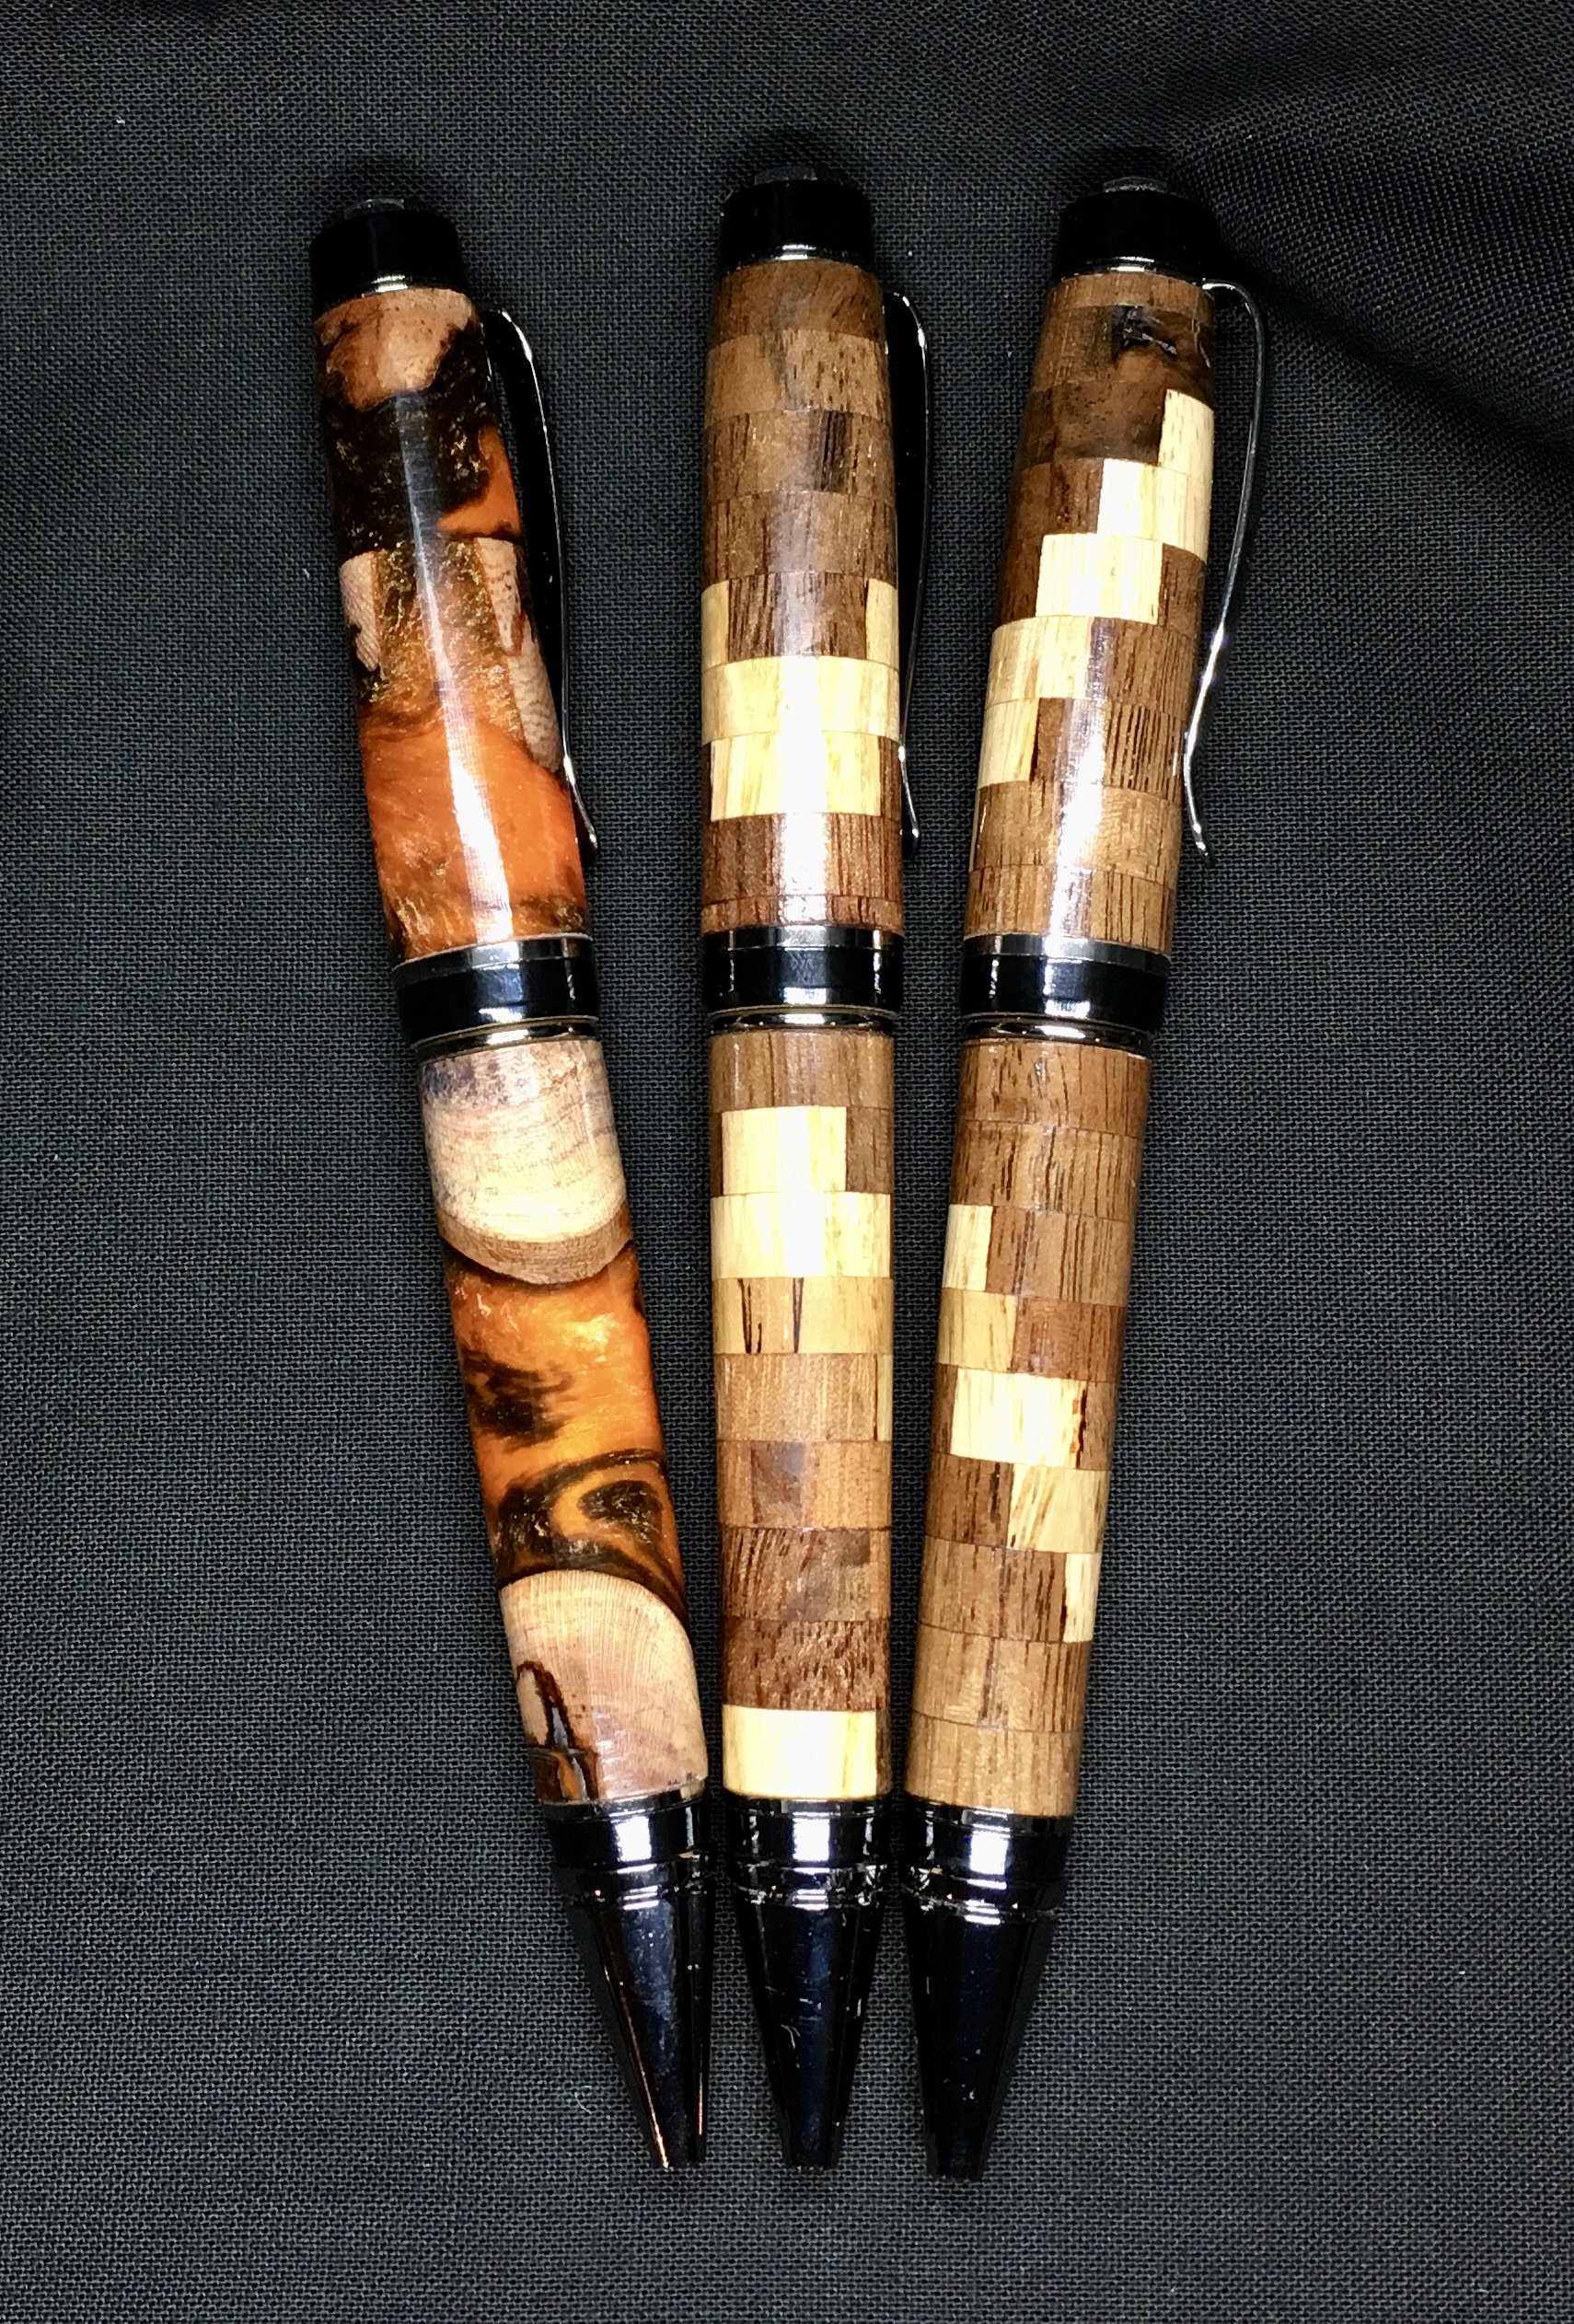 First attempts at making hybrid blanks/segmented blanks for pen kits